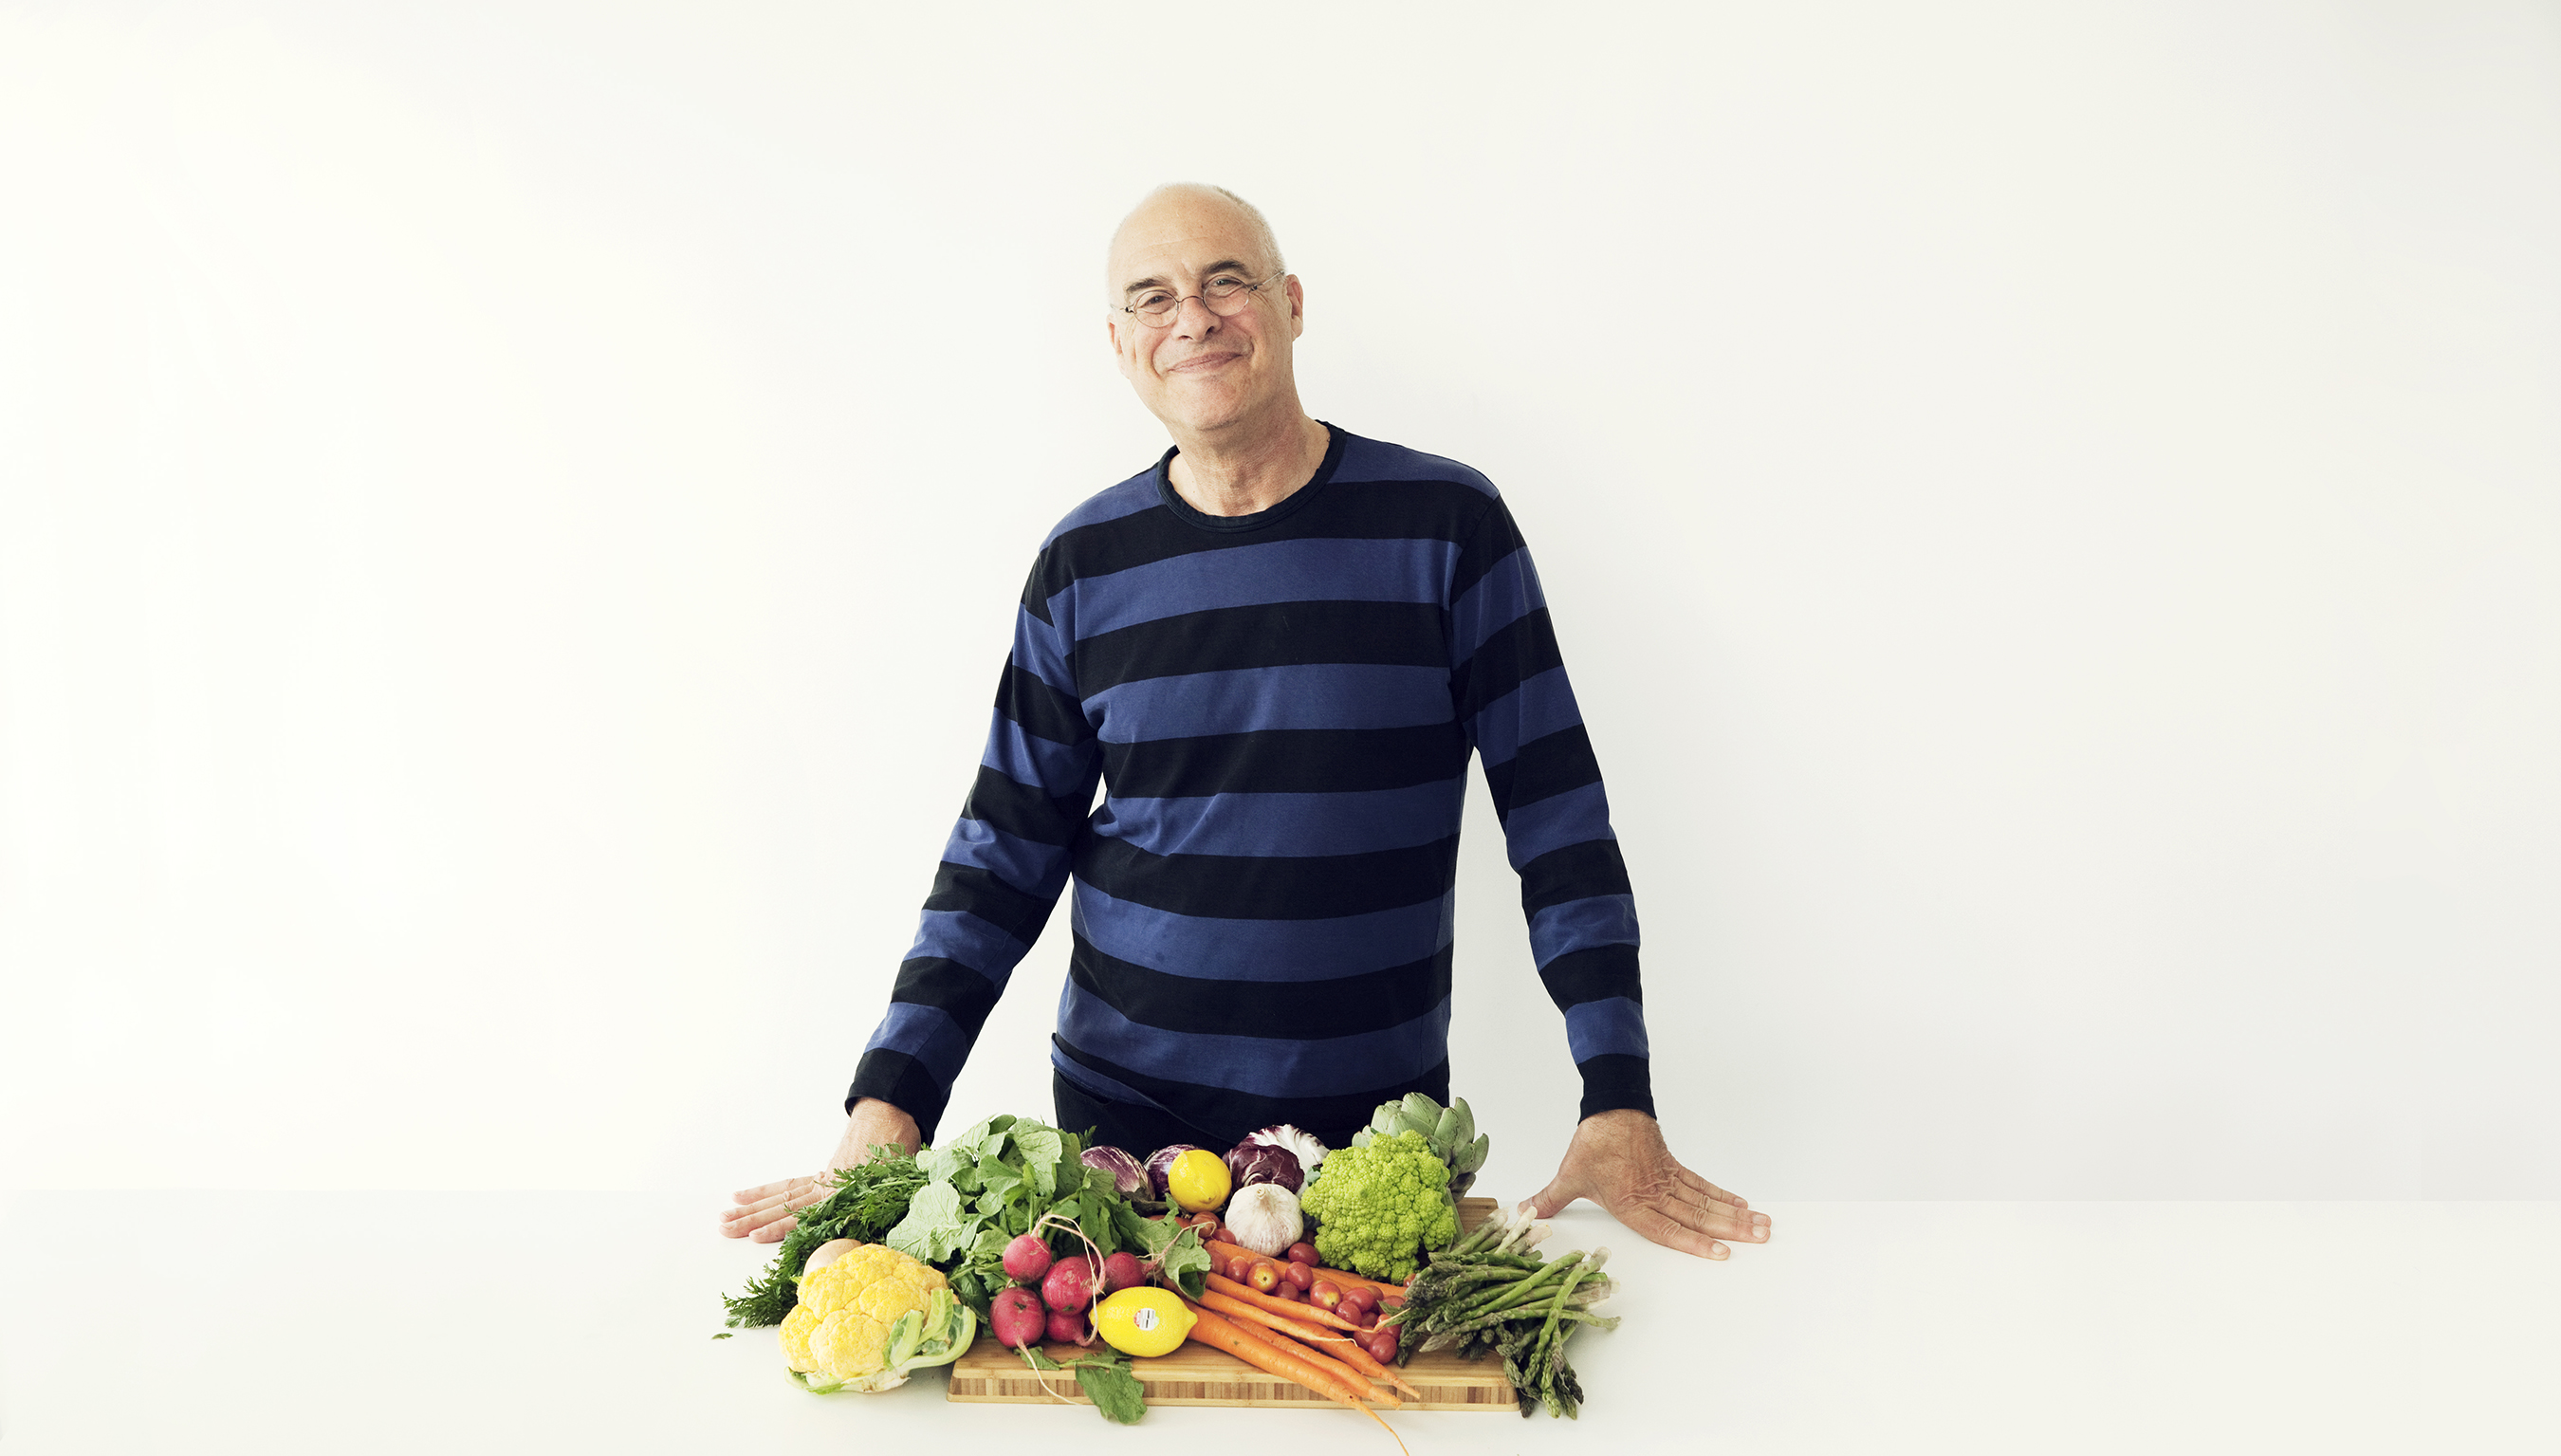 Episode 1 of “Cooking in Your True to Food Kitchen” features best-selling cookbook author and True to Food Films host Mark Bittman, interior designer Linda Engler and Chef Nick Ritchie.